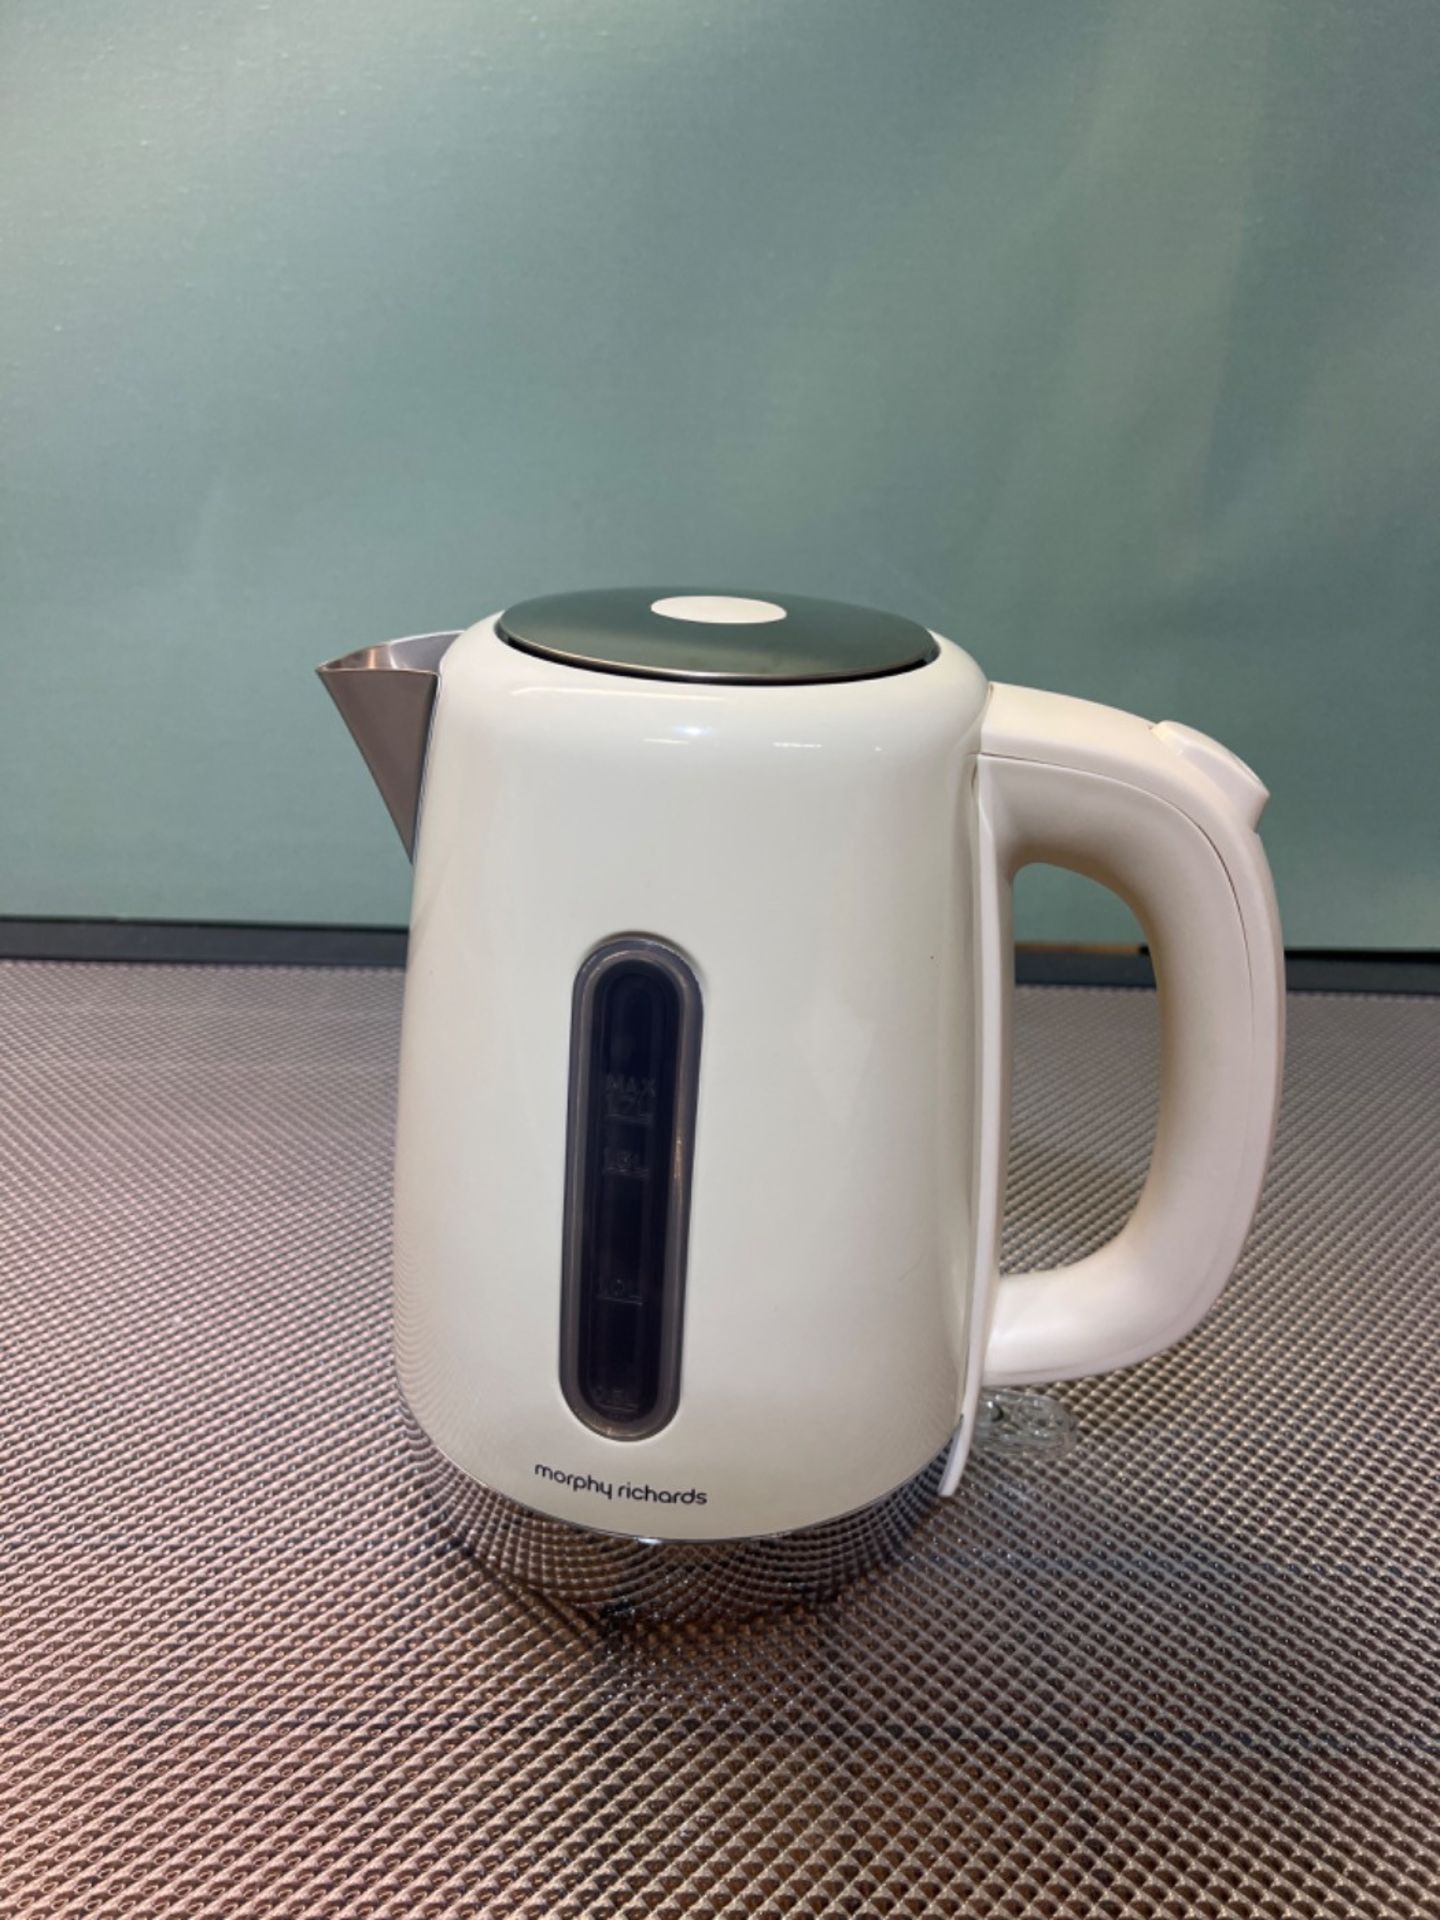 Morphy Richards 102784 Cream Equip Stainless Steel Jug Kettle, 3000 W, 1.7 Litre, Cream - Image 2 of 2